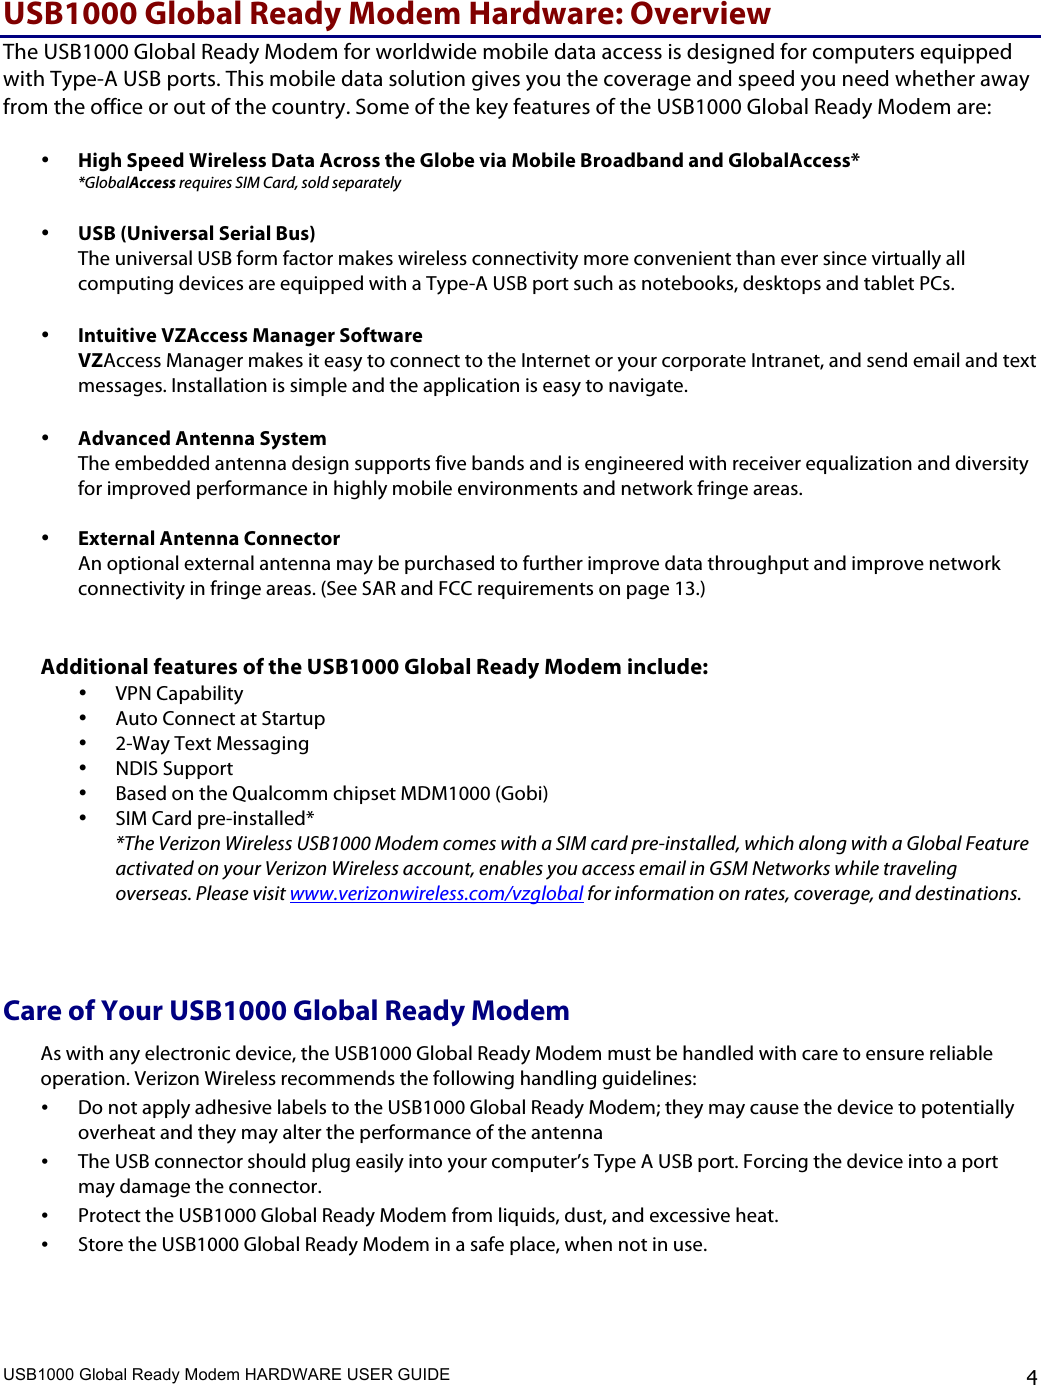 USB1000 Global Ready Modem HARDWARE USER GUIDE    4 USB1000 Global Ready Modem Hardware: Overview The USB1000 Global Ready Modem for worldwide mobile data access is designed for computers equipped with Type-A USB ports. This mobile data solution gives you the coverage and speed you need whether away from the office or out of the country. Some of the key features of the USB1000 Global Ready Modem are:  • High Speed Wireless Data Across the Globe via Mobile Broadband and GlobalAccess* *GlobalAccess requires SIM Card, sold separately  • USB (Universal Serial Bus)  The universal USB form factor makes wireless connectivity more convenient than ever since virtually all computing devices are equipped with a Type-A USB port such as notebooks, desktops and tablet PCs.  • Intuitive VZAccess Manager Software  VZAccess Manager makes it easy to connect to the Internet or your corporate Intranet, and send email and text messages. Installation is simple and the application is easy to navigate.   • Advanced Antenna System The embedded antenna design supports five bands and is engineered with receiver equalization and diversity for improved performance in highly mobile environments and network fringe areas.   • External Antenna Connector  An optional external antenna may be purchased to further improve data throughput and improve network connectivity in fringe areas. (See SAR and FCC requirements on page 13.)   Additional features of the USB1000 Global Ready Modem include:  • VPN Capability • Auto Connect at Startup • 2-Way Text Messaging  • NDIS Support • Based on the Qualcomm chipset MDM1000 (Gobi) • SIM Card pre-installed* *The Verizon Wireless USB1000 Modem comes with a SIM card pre-installed, which along with a Global Feature activated on your Verizon Wireless account, enables you access email in GSM Networks while traveling overseas. Please visit www.verizonwireless.com/vzglobal for information on rates, coverage, and destinations.   Care of Your USB1000 Global Ready Modem  As with any electronic device, the USB1000 Global Ready Modem must be handled with care to ensure reliable operation. Verizon Wireless recommends the following handling guidelines:   • Do not apply adhesive labels to the USB1000 Global Ready Modem; they may cause the device to potentially overheat and they may alter the performance of the antenna • The USB connector should plug easily into your computer’s Type A USB port. Forcing the device into a port may damage the connector. • Protect the USB1000 Global Ready Modem from liquids, dust, and excessive heat. • Store the USB1000 Global Ready Modem in a safe place, when not in use.  